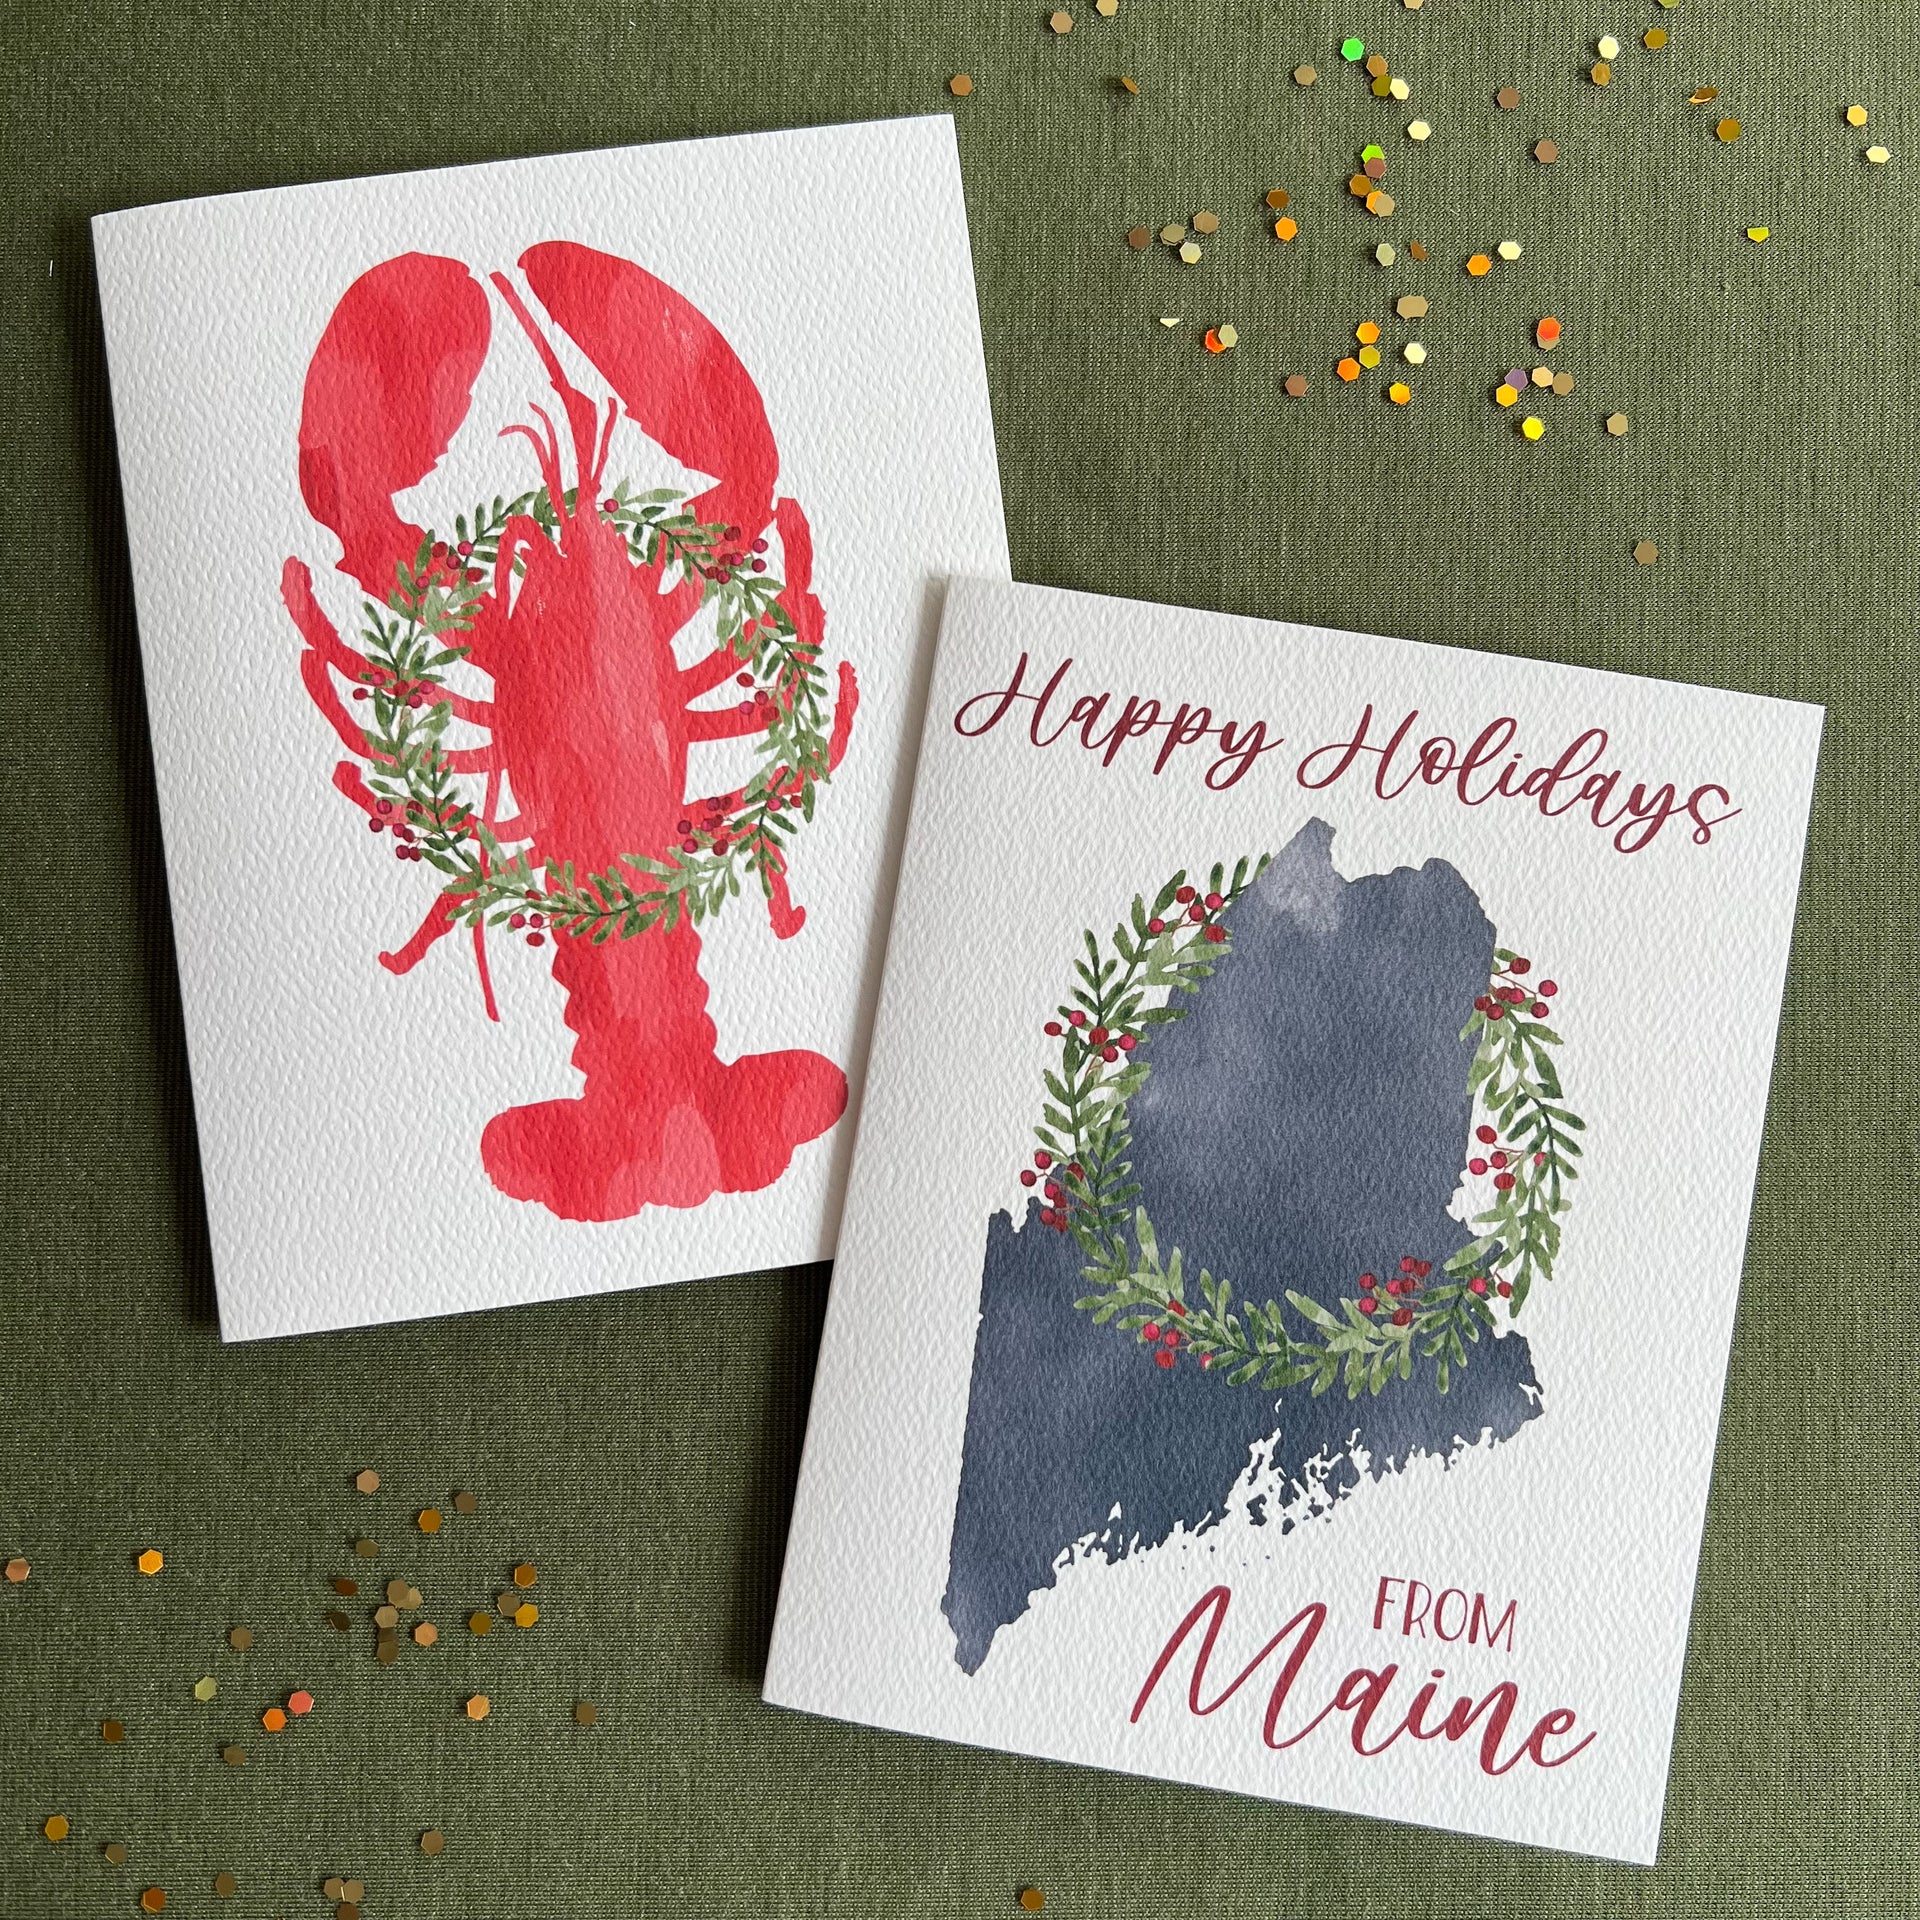 Maine Lobster Holiday Card and Maine Holiday Card